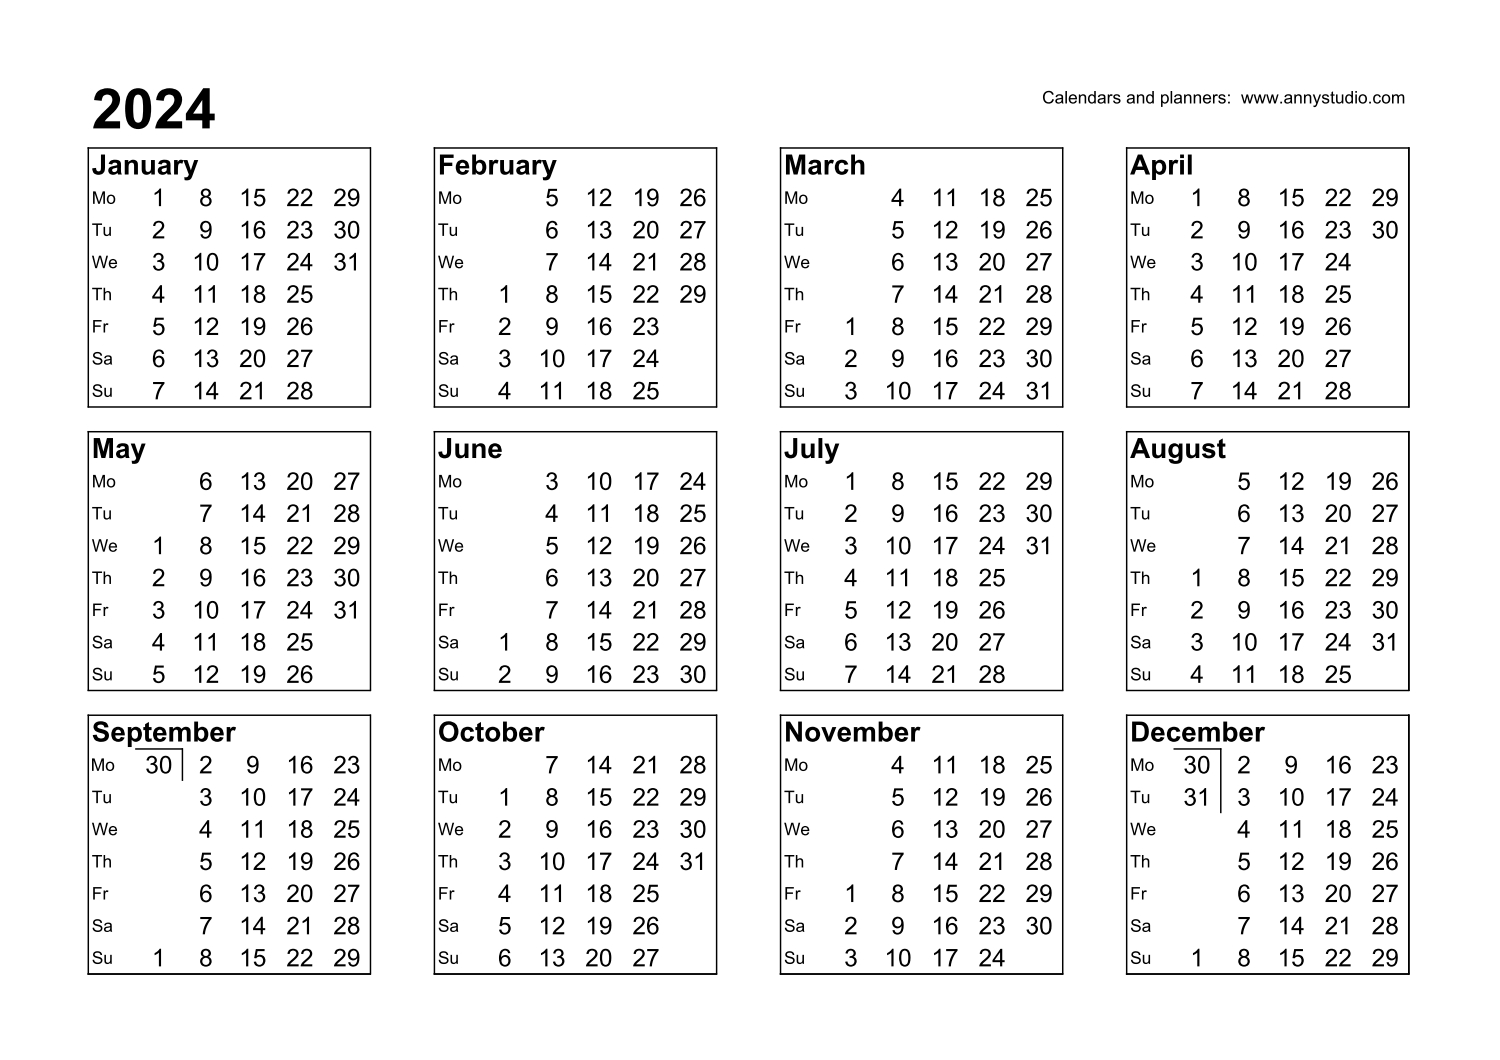 Free Printable Calendars And Planners 2024, 2025 And 2026 | Printable Calendar 2024 South Africa Pdf Download